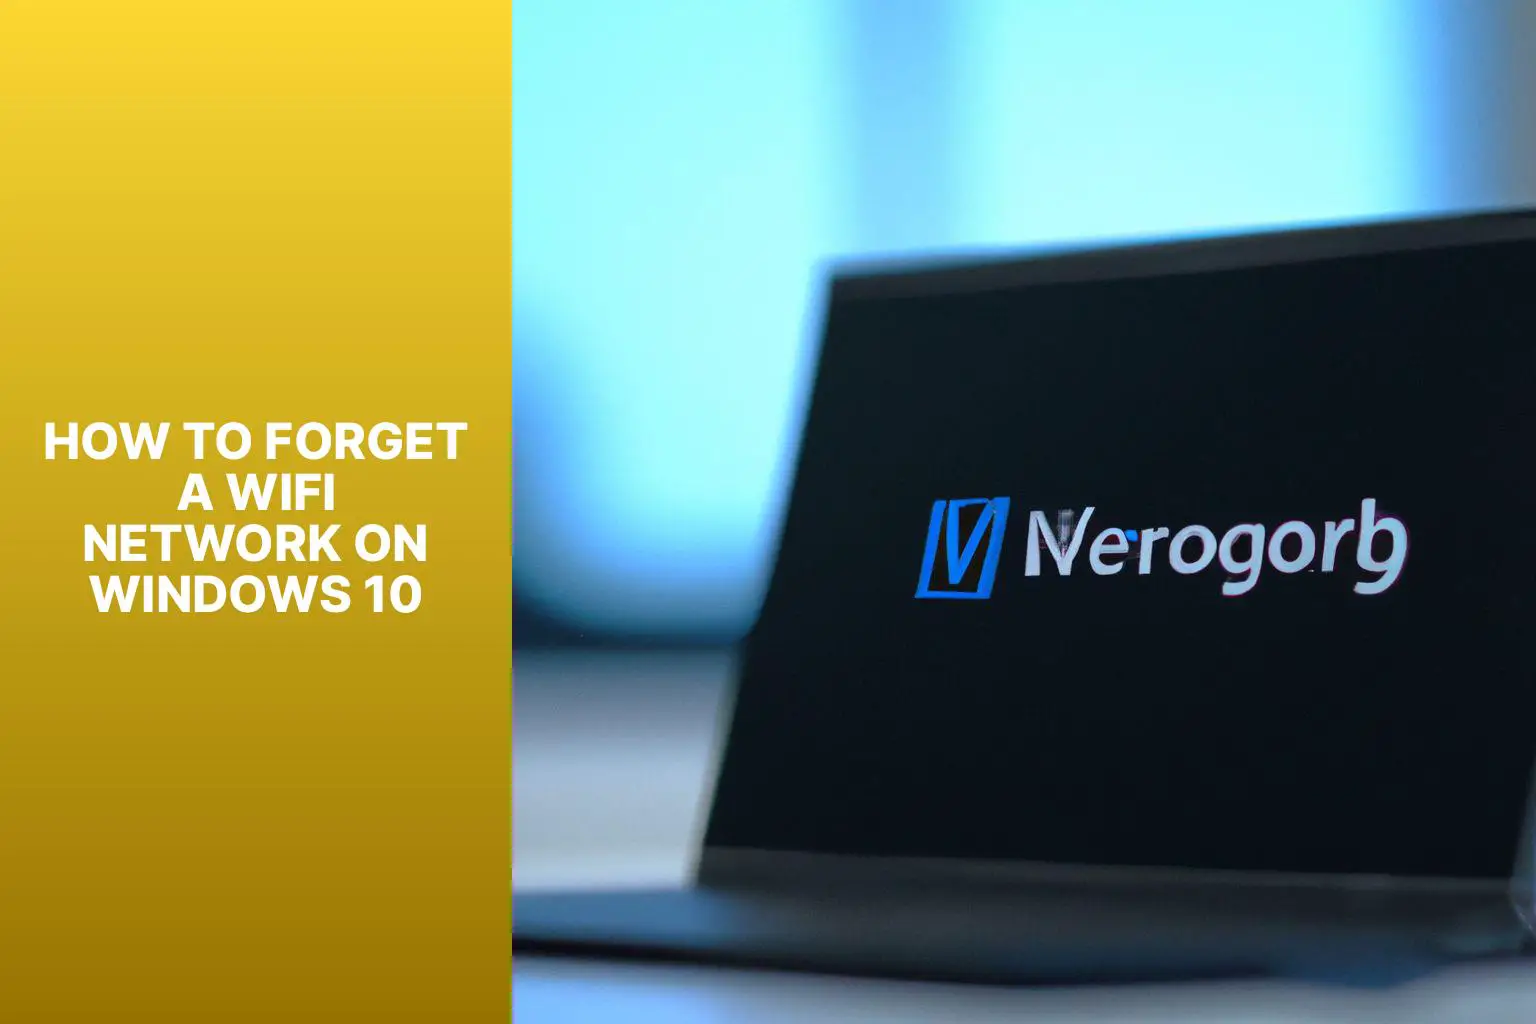 Forget WiFi Network on Windows how to forget a wifi network on windows 10dkep